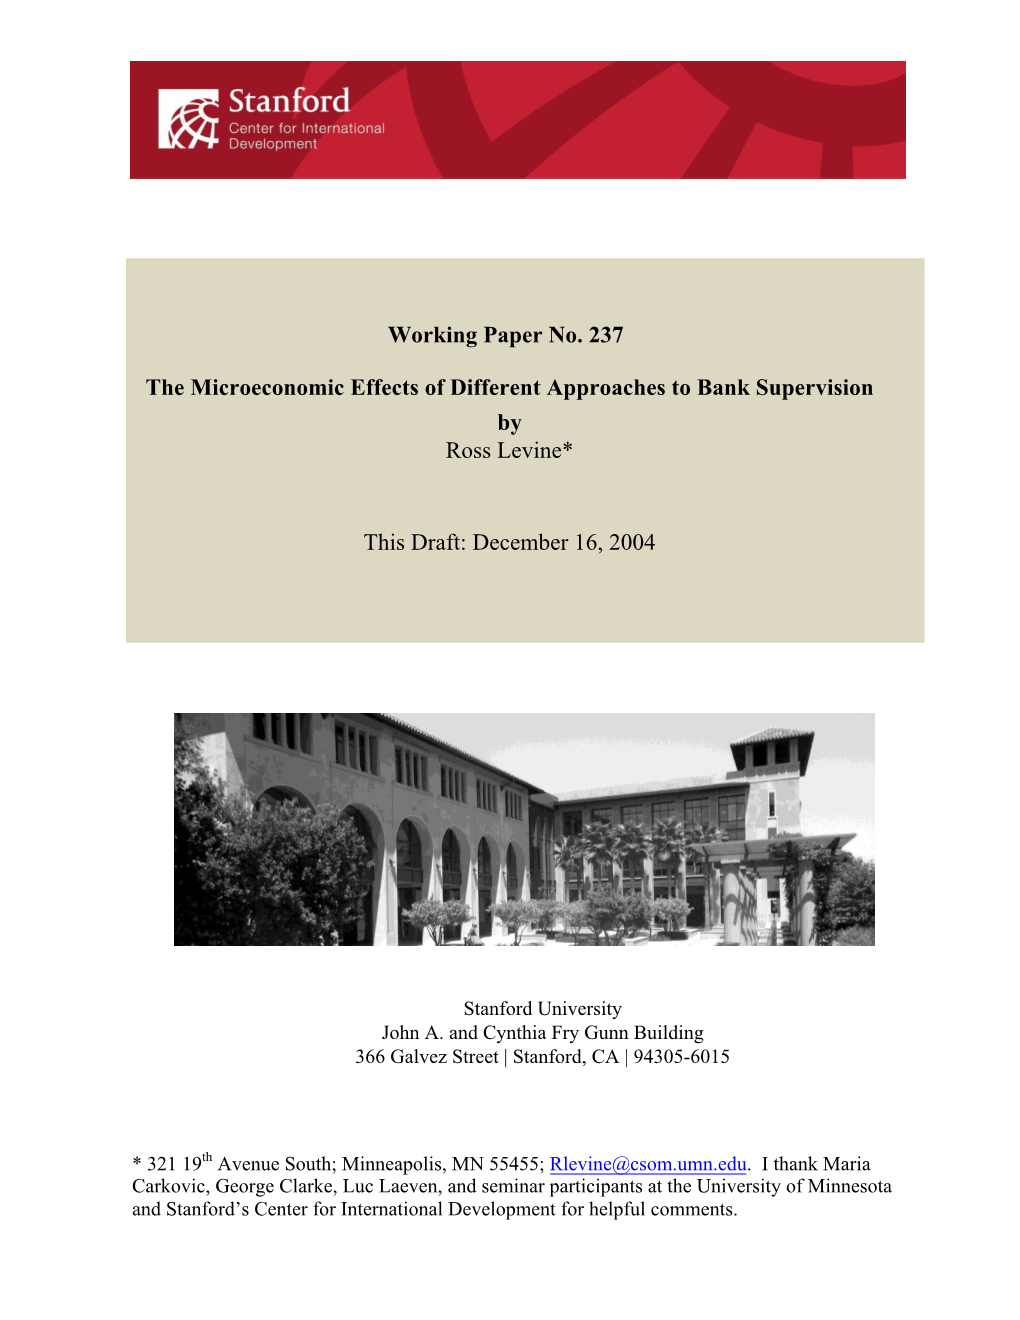 The Microeconomic Effects of Different Approaches to Bank Supervision by Ross Levine*